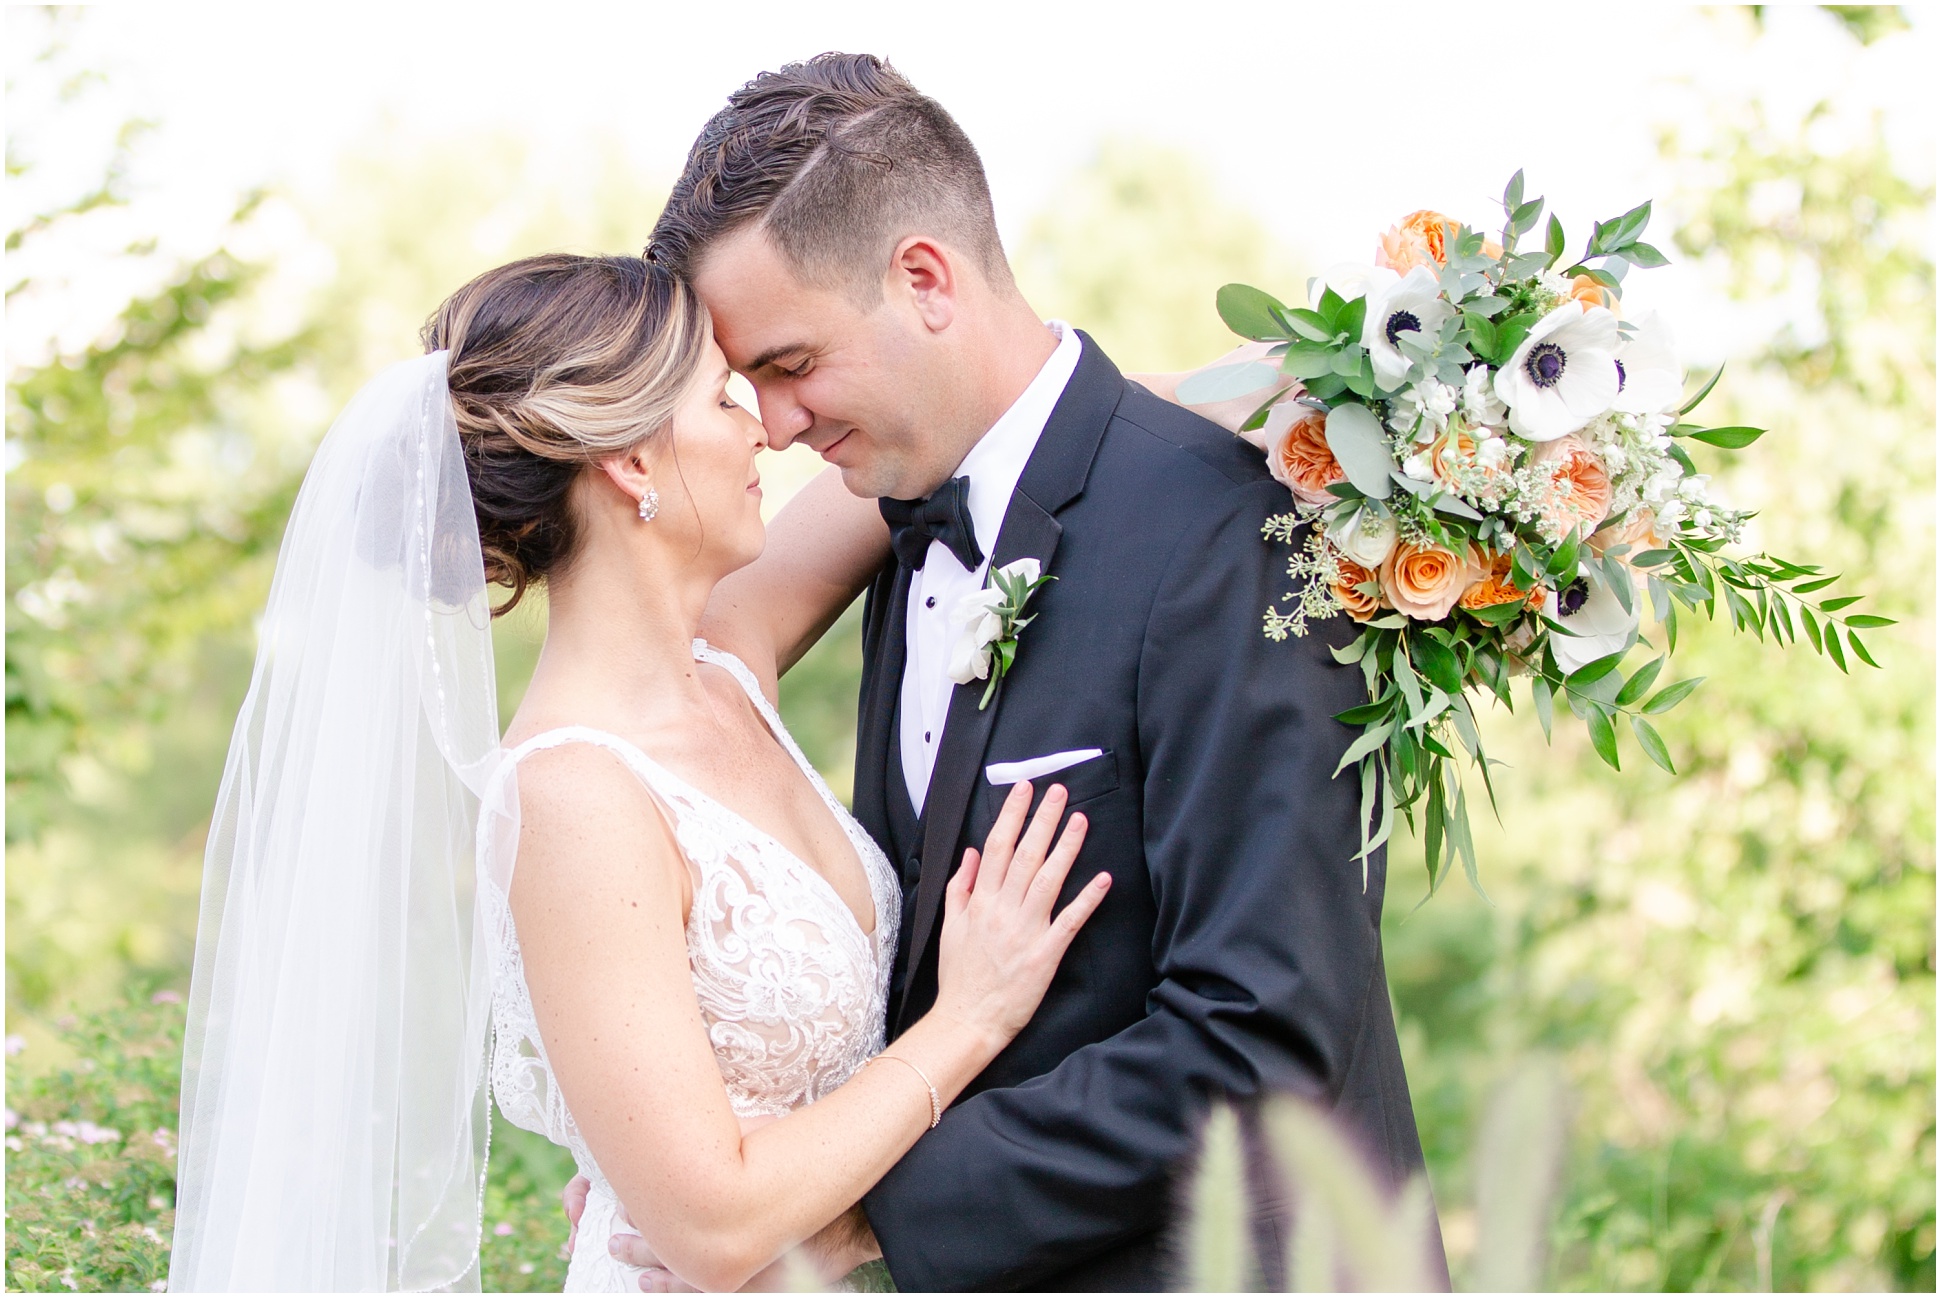 bide wrapping arm holding bouquet around groom while touching foreheads 